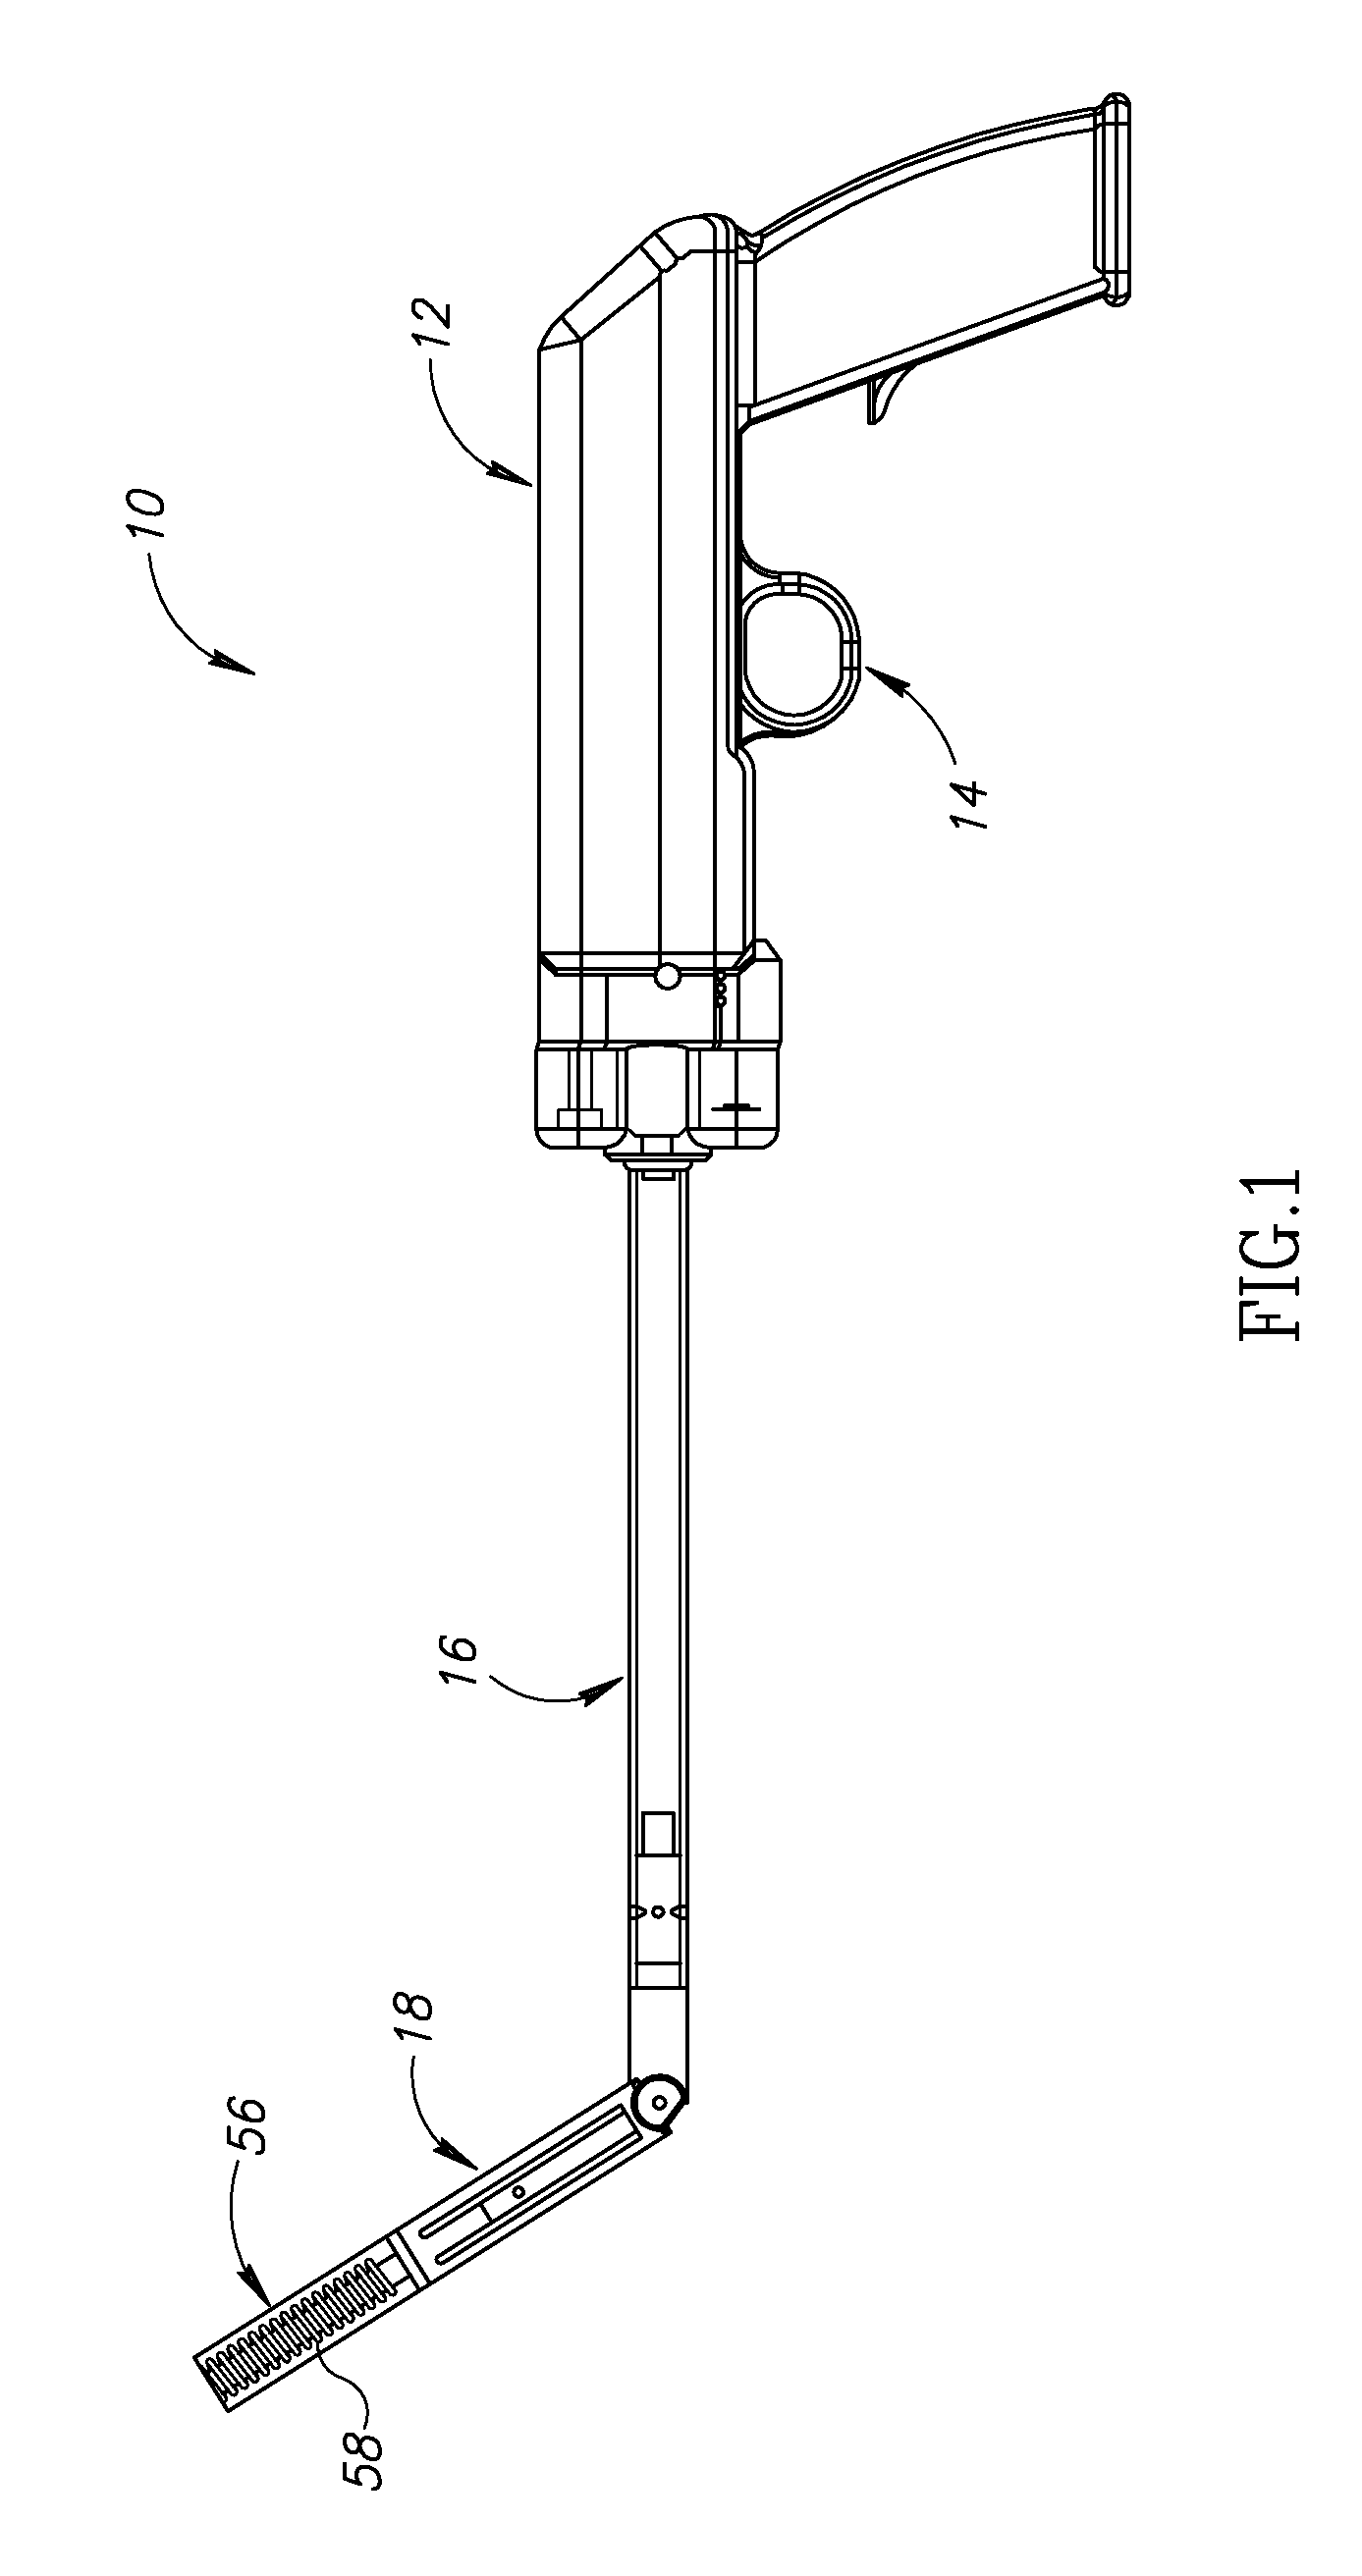 Device and method for applying rotary tacks